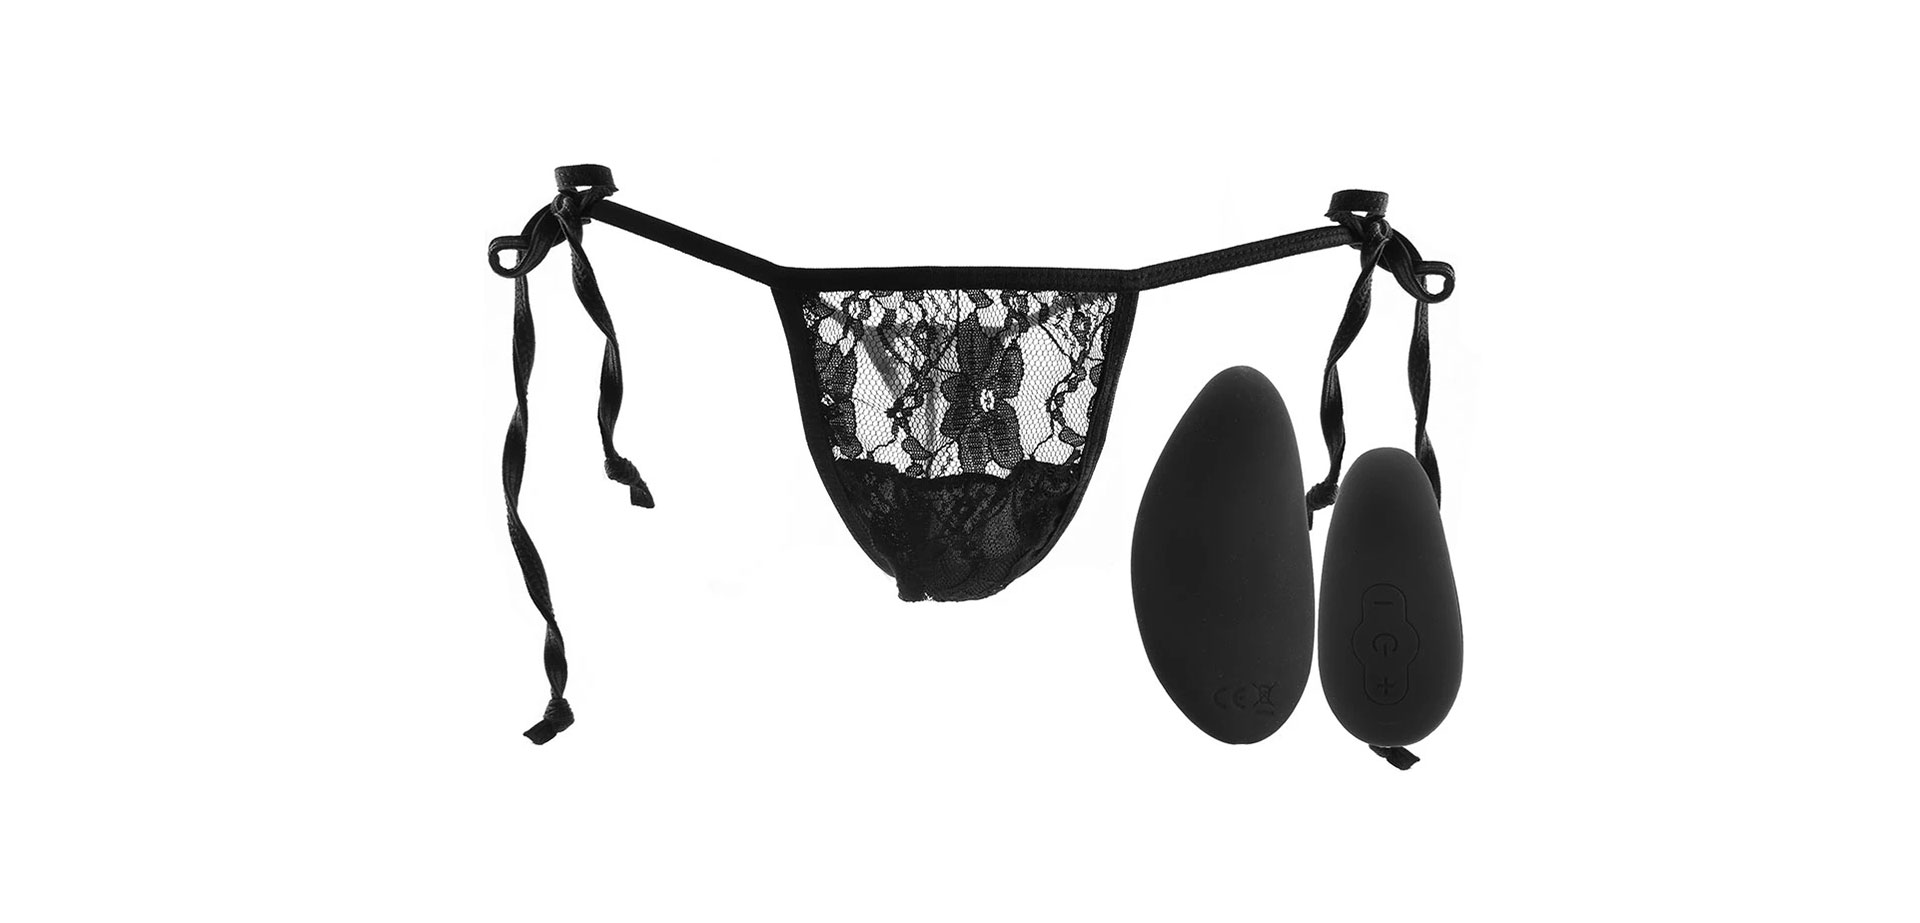 High quality remote controlled vibrating panty set.